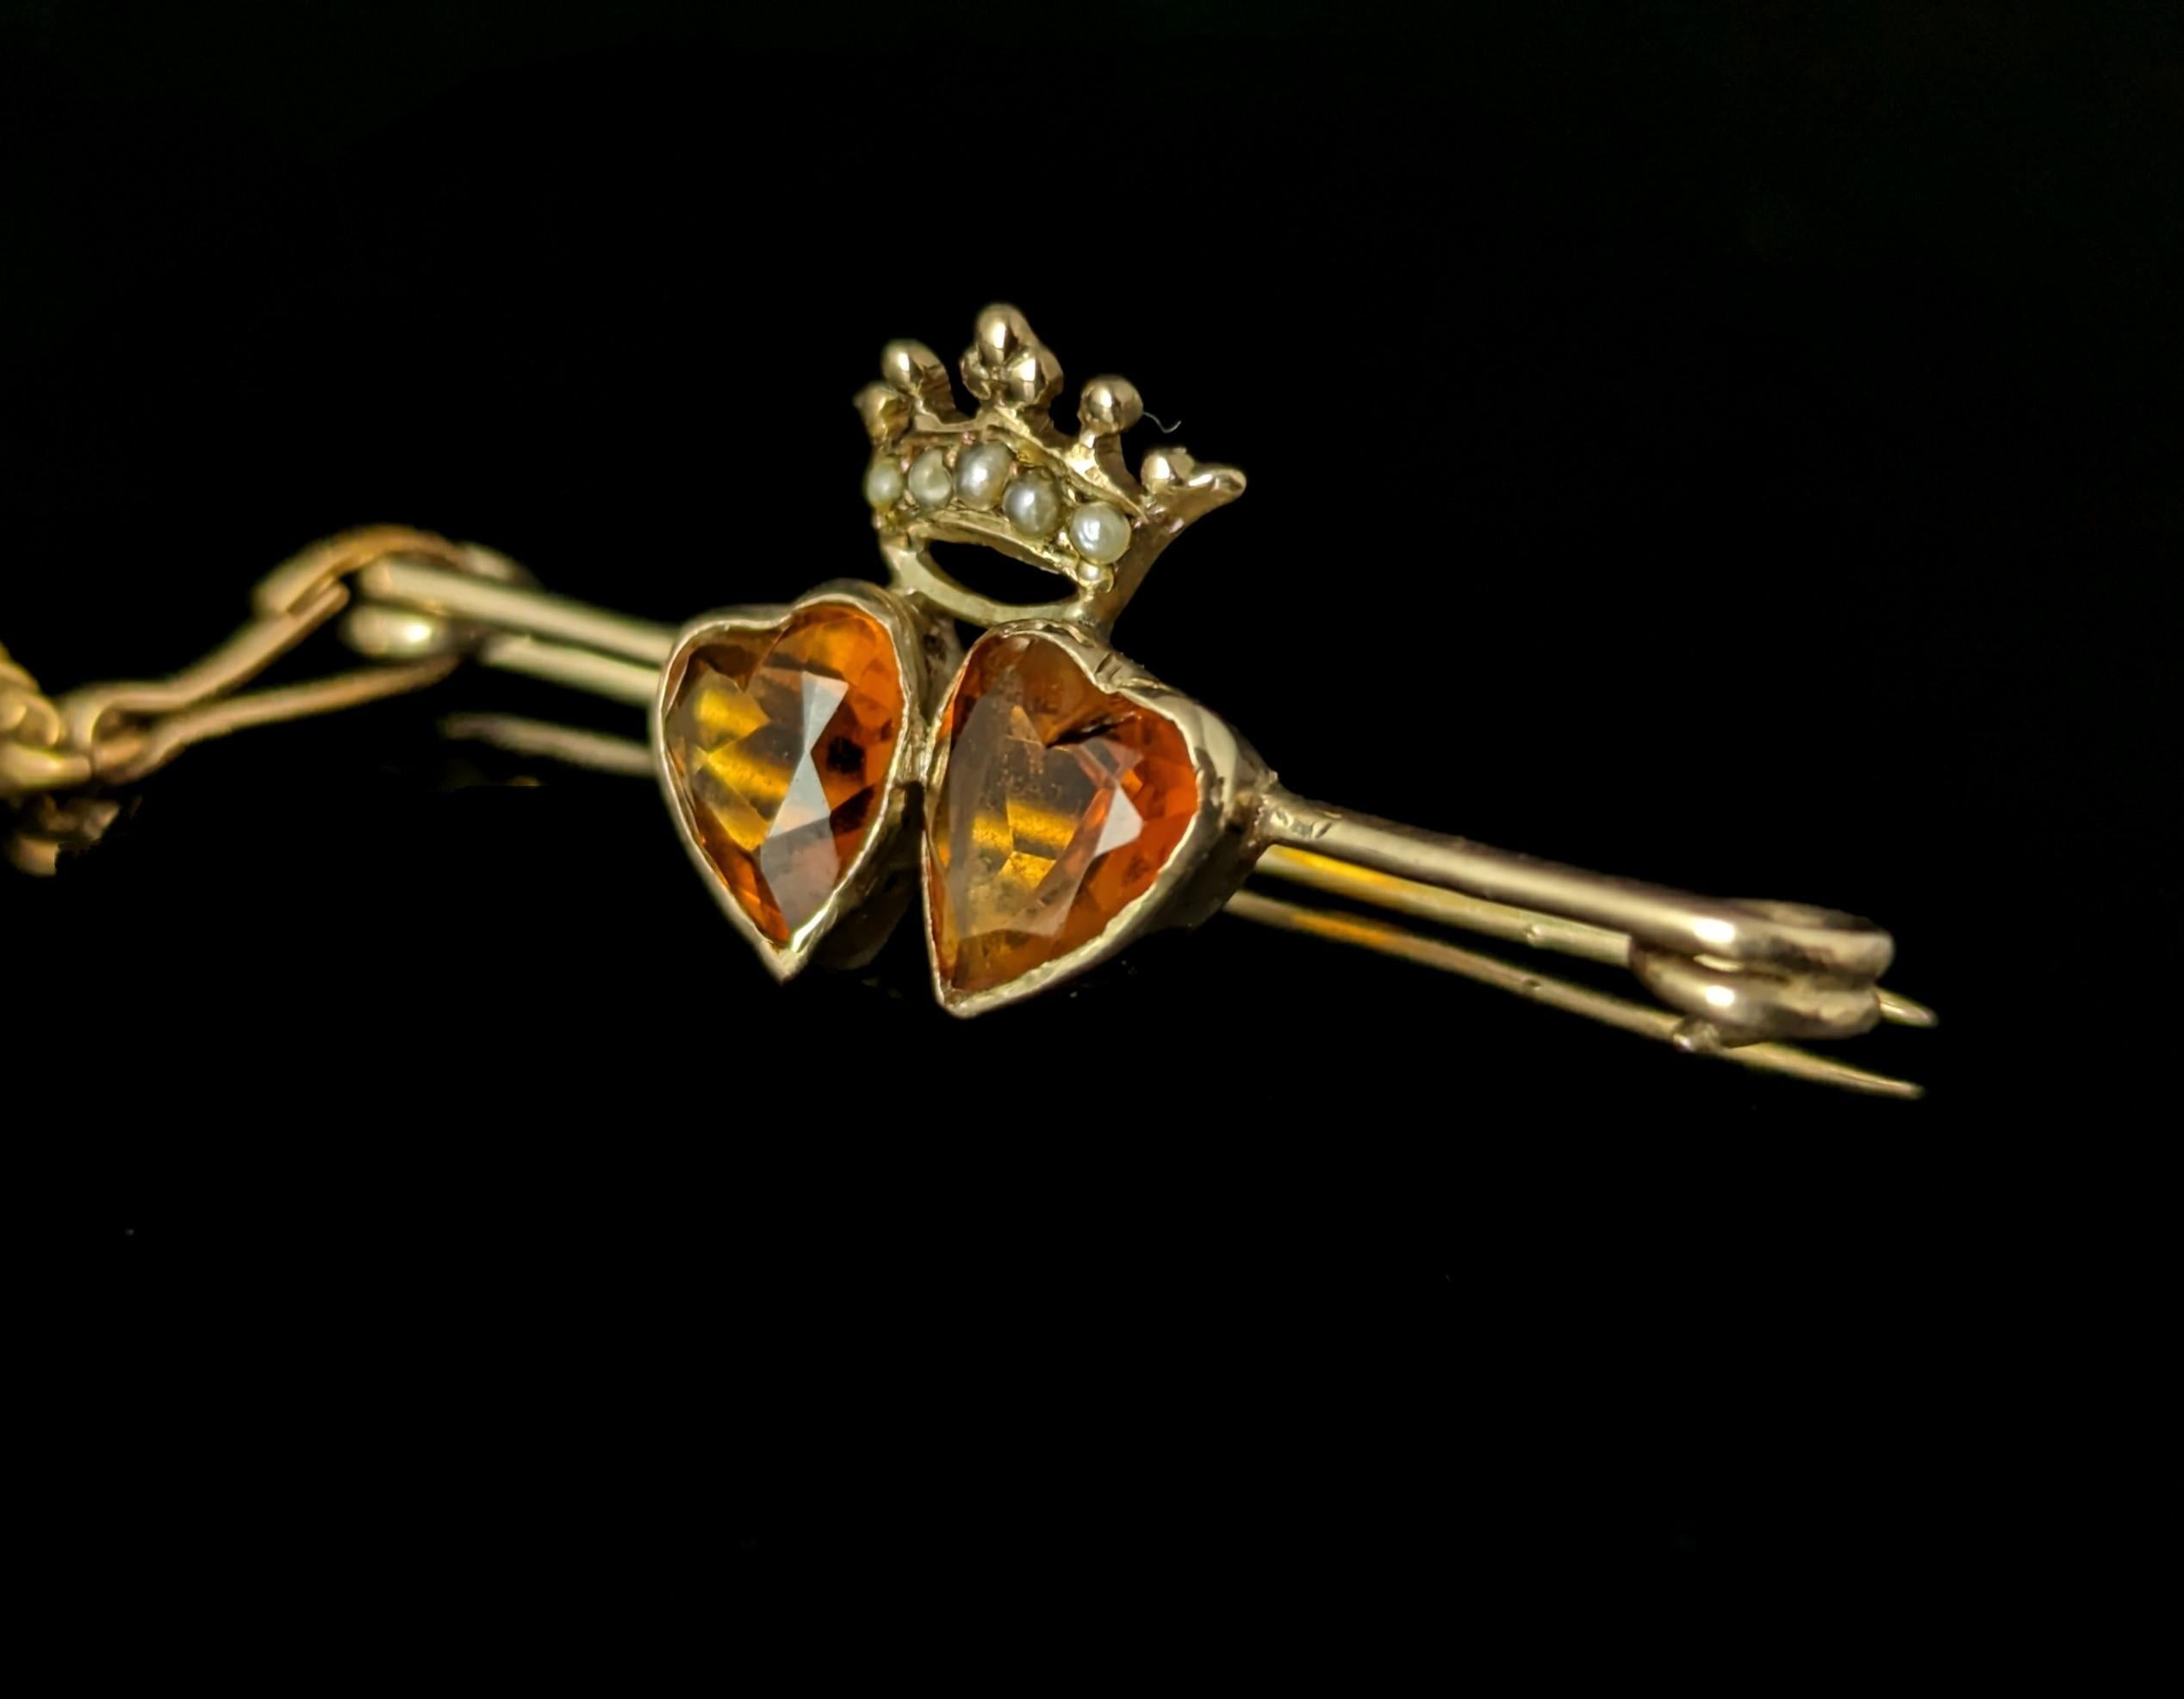 The sweetest little antique Citrine and seed pearl crowned hearts brooch in 9ct gold.

The crowned hearts were a strong and powerful symbol of love between two people and fidelity or their passion and devotion for each other reigning their